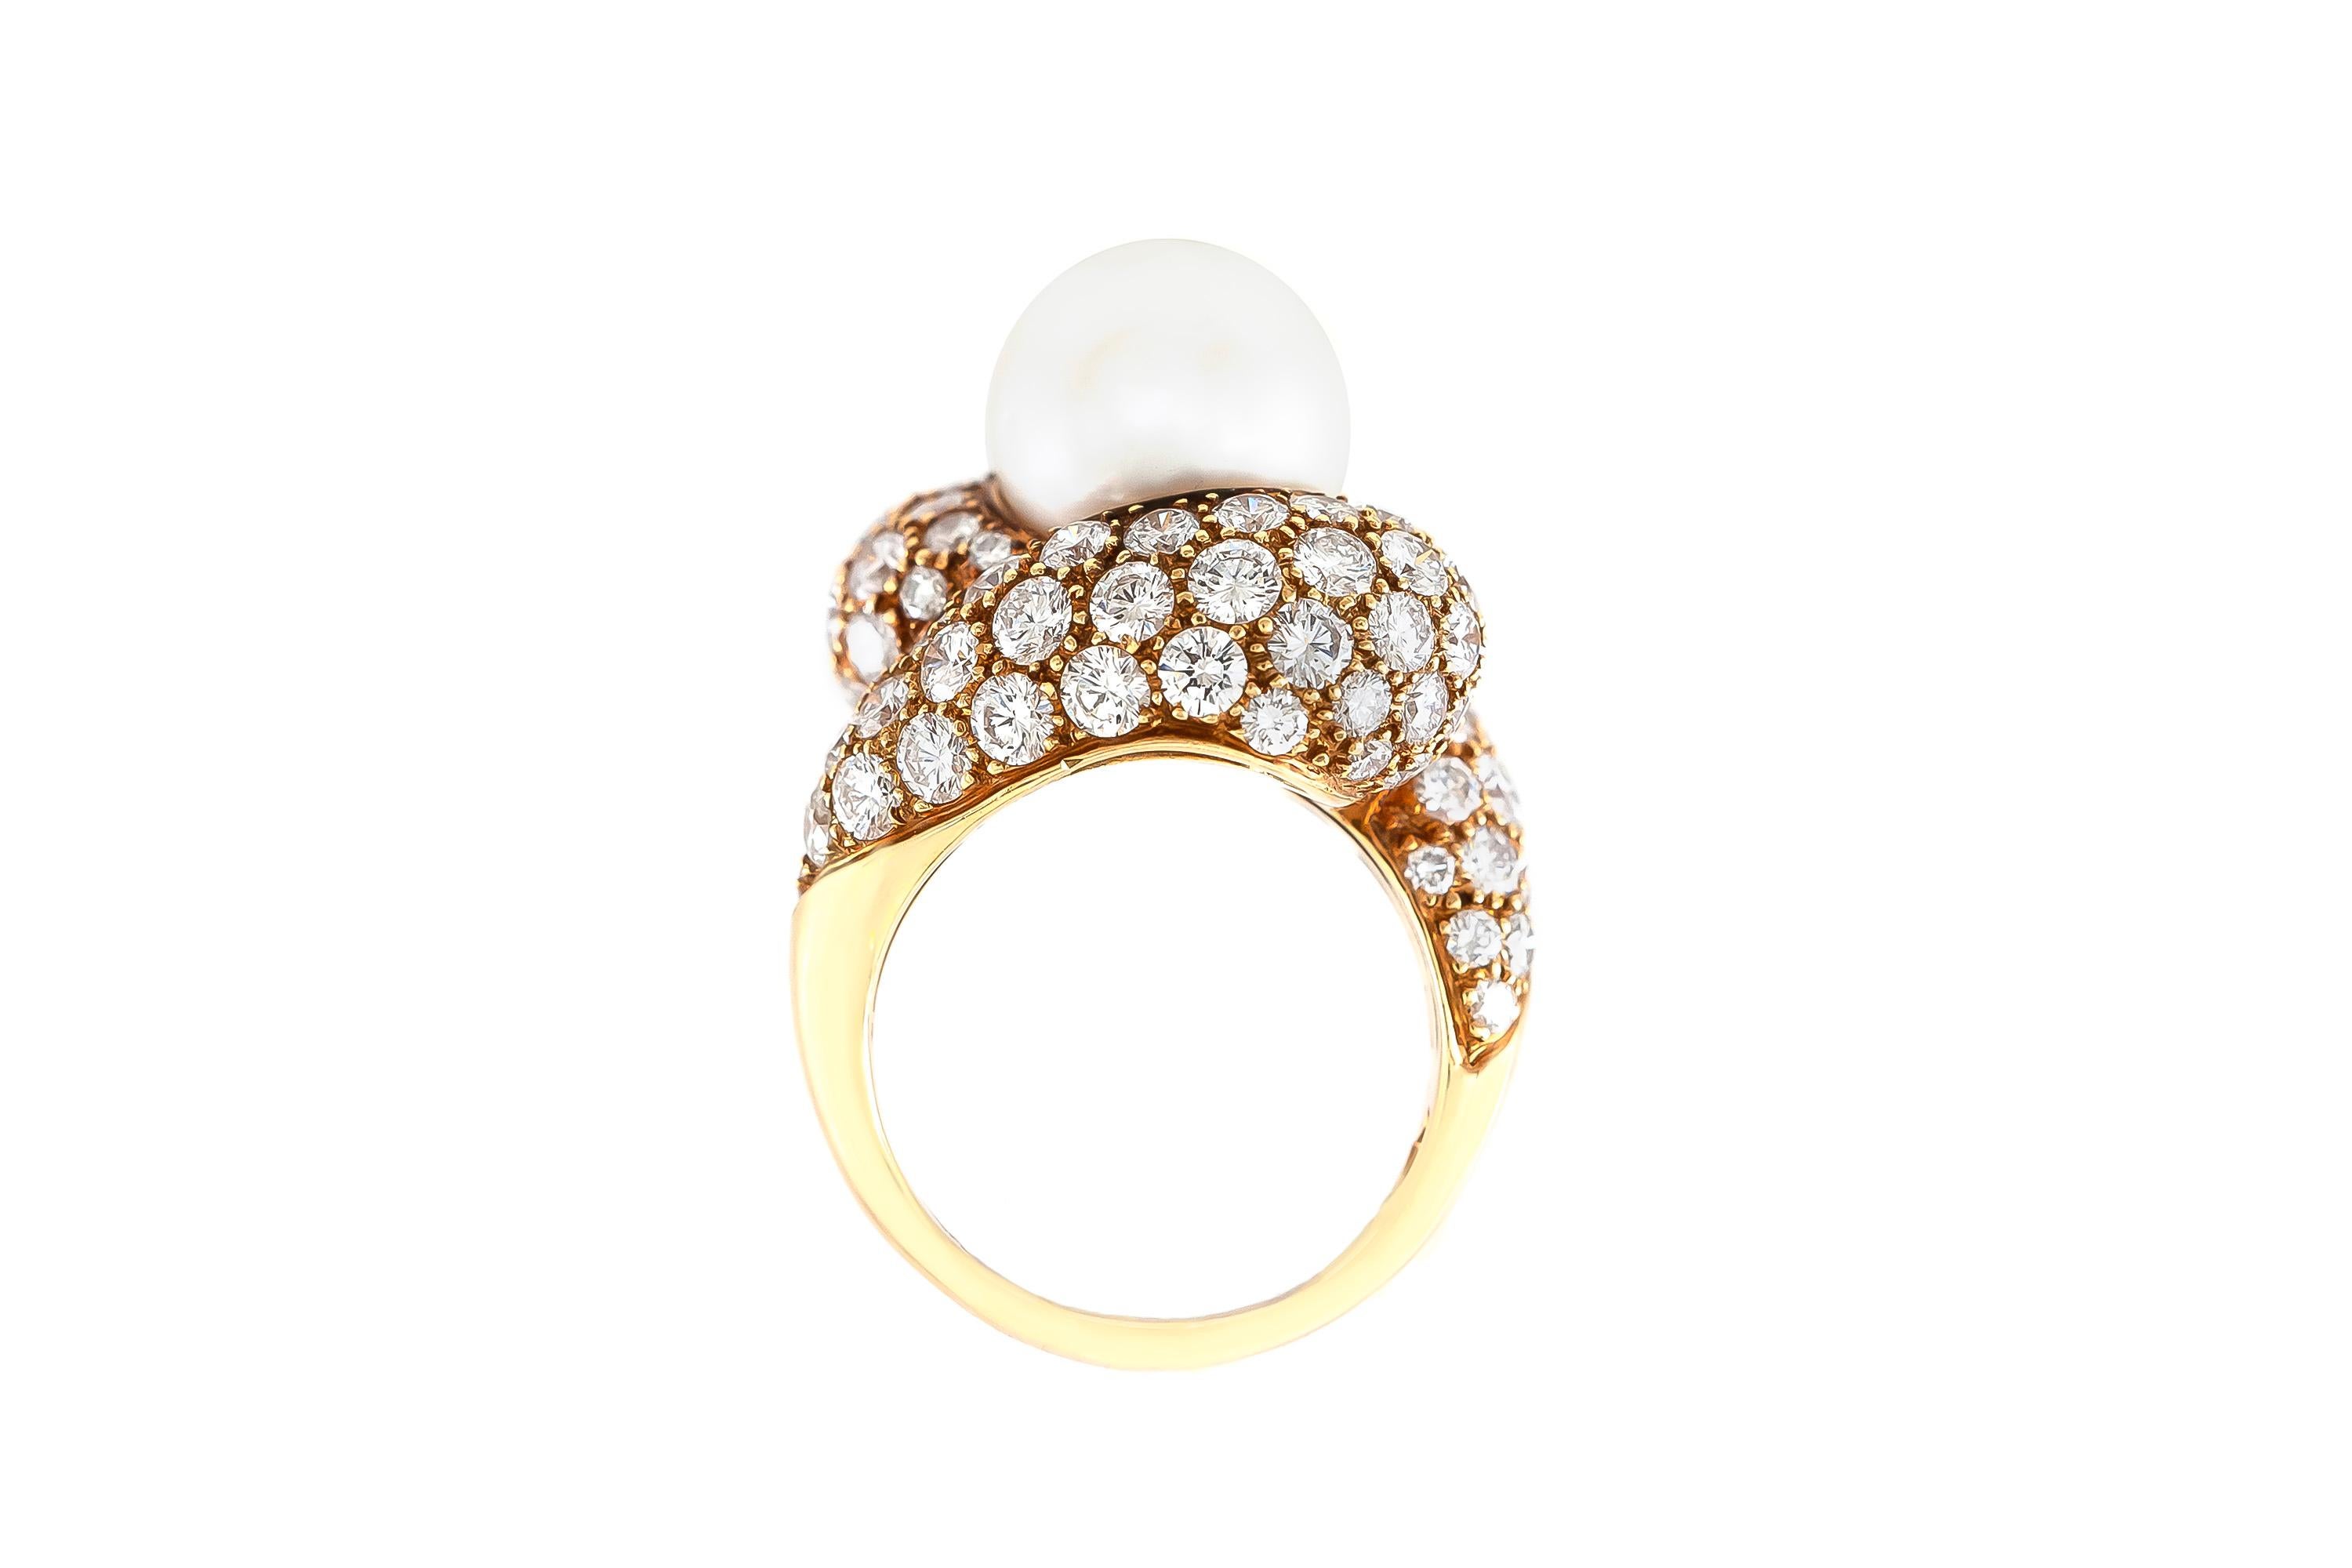 The ring is finely crafted in 18k yellow gold with center south sea pearl and diamonds weighing approximately total of 10.00 carat.
Circa 1980.